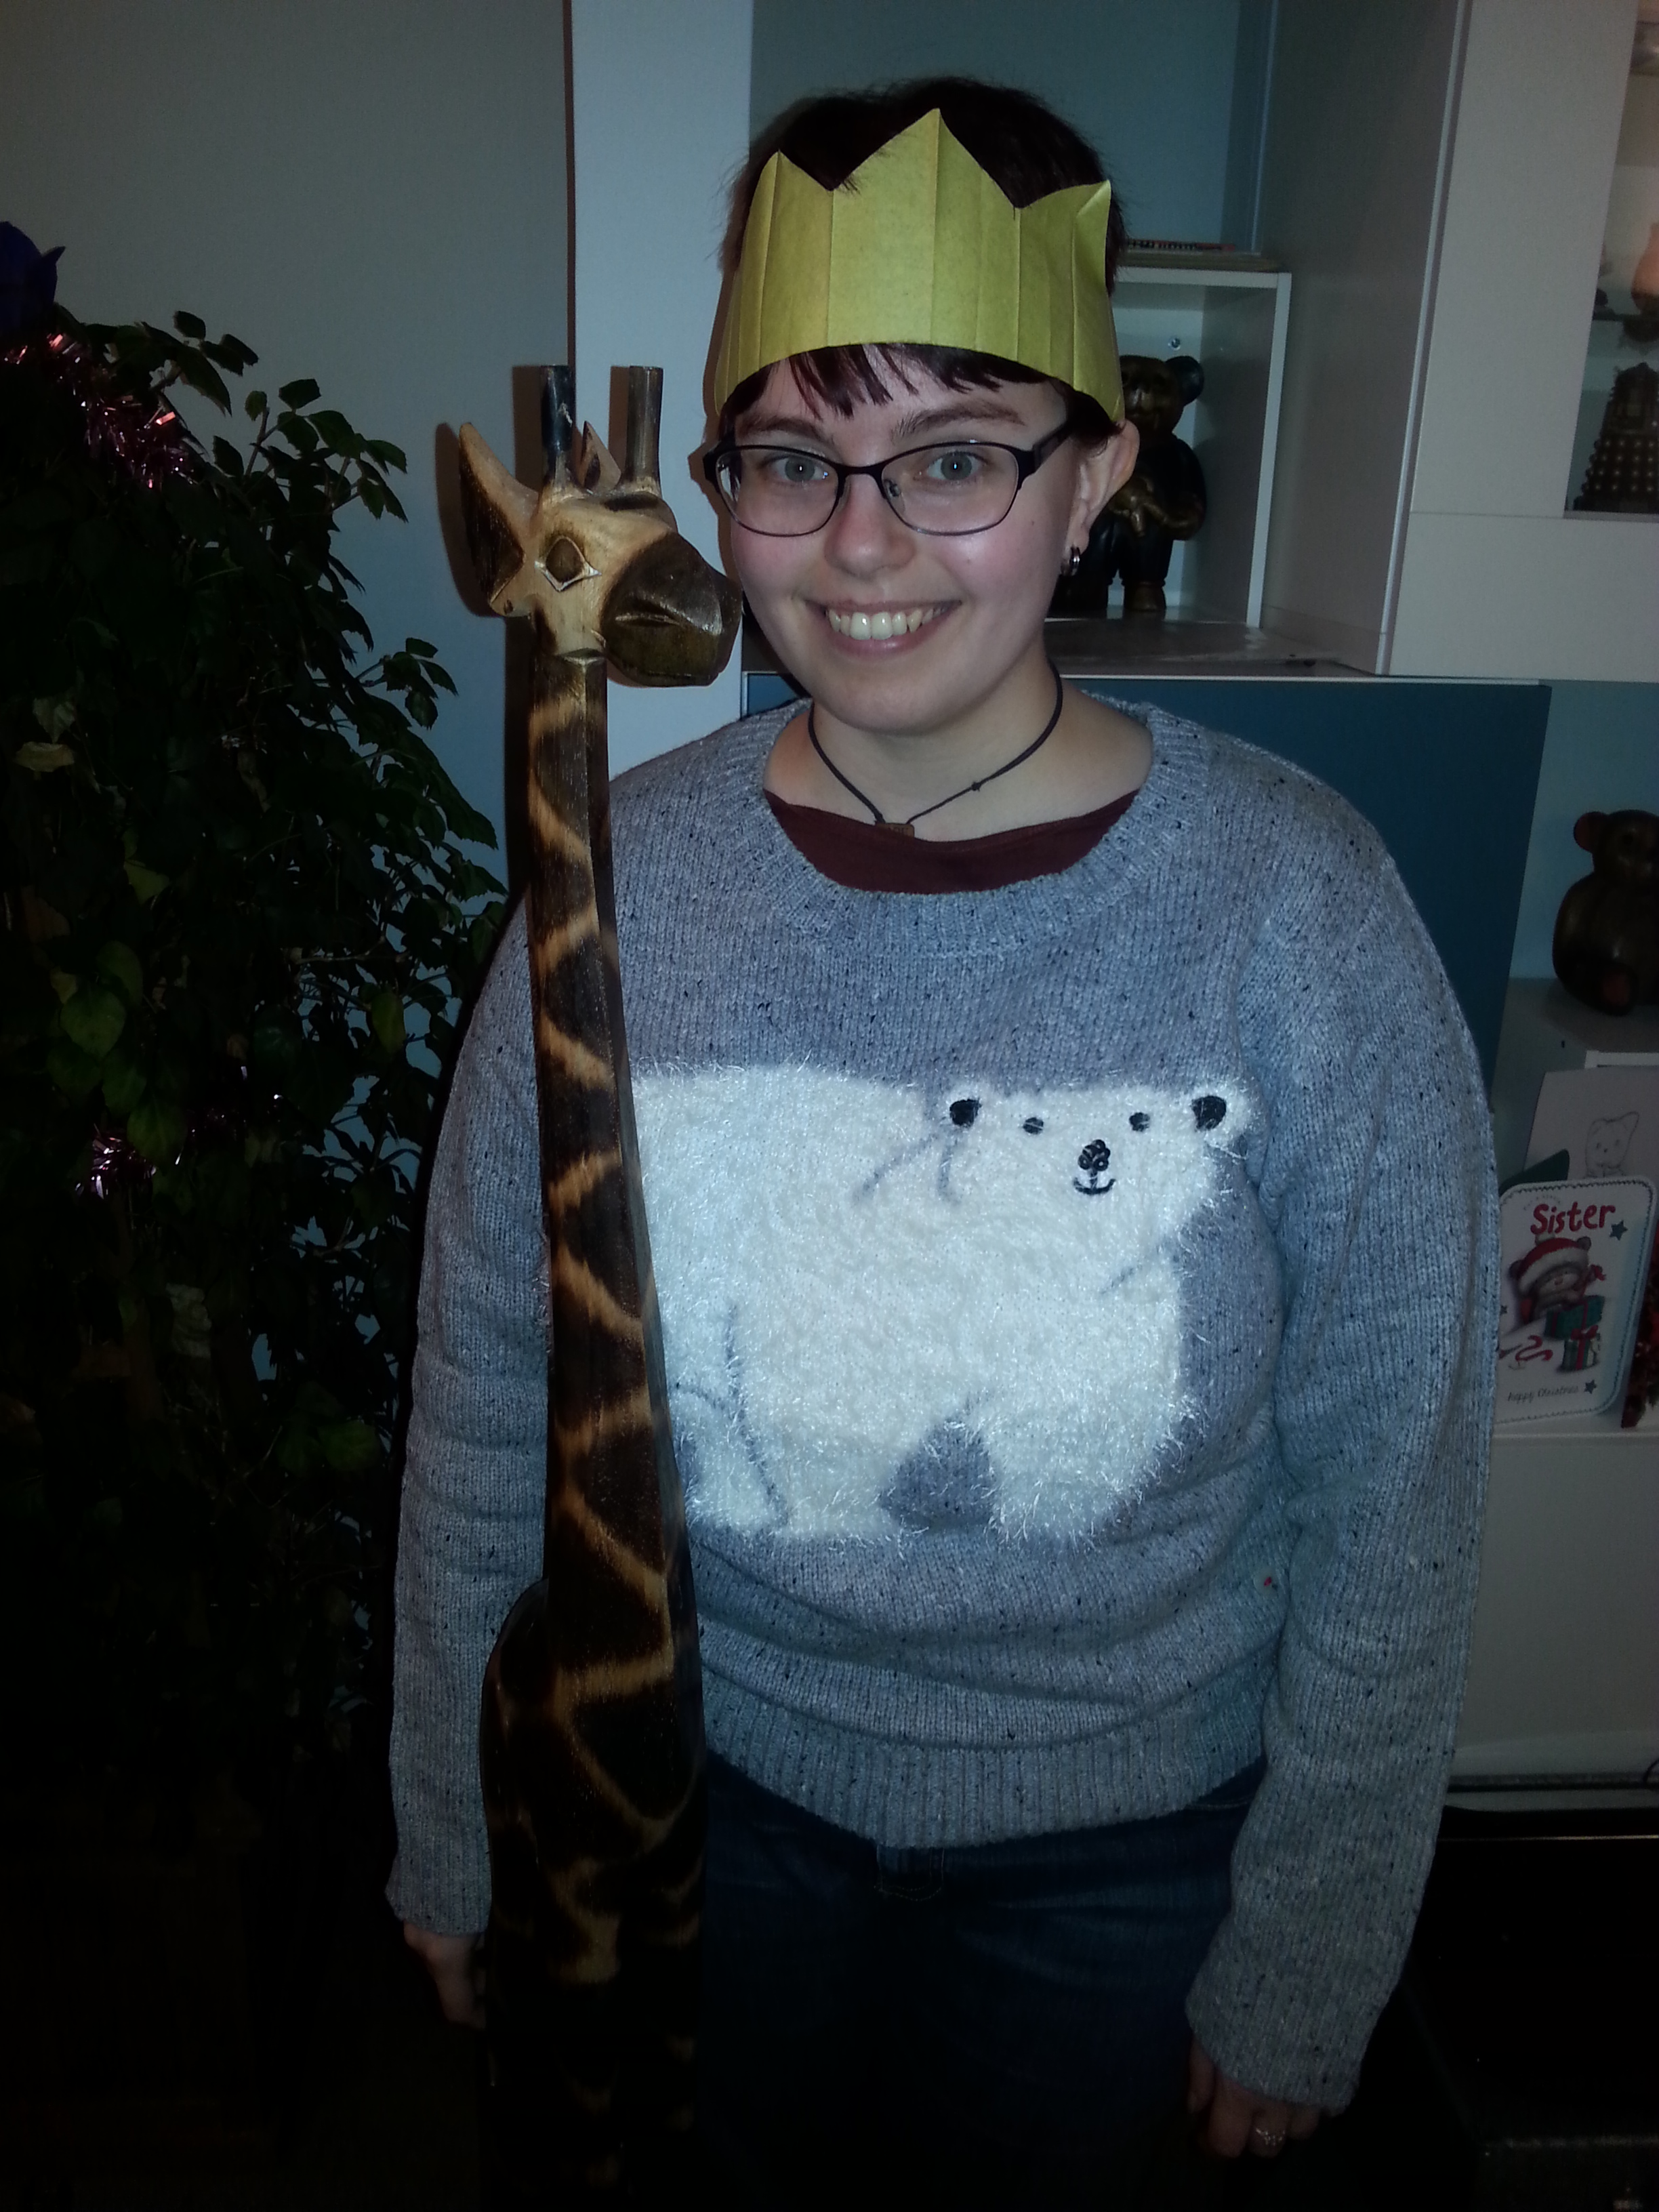 Photo of me wearing a paper party hat, next to my five foot tall giraffe